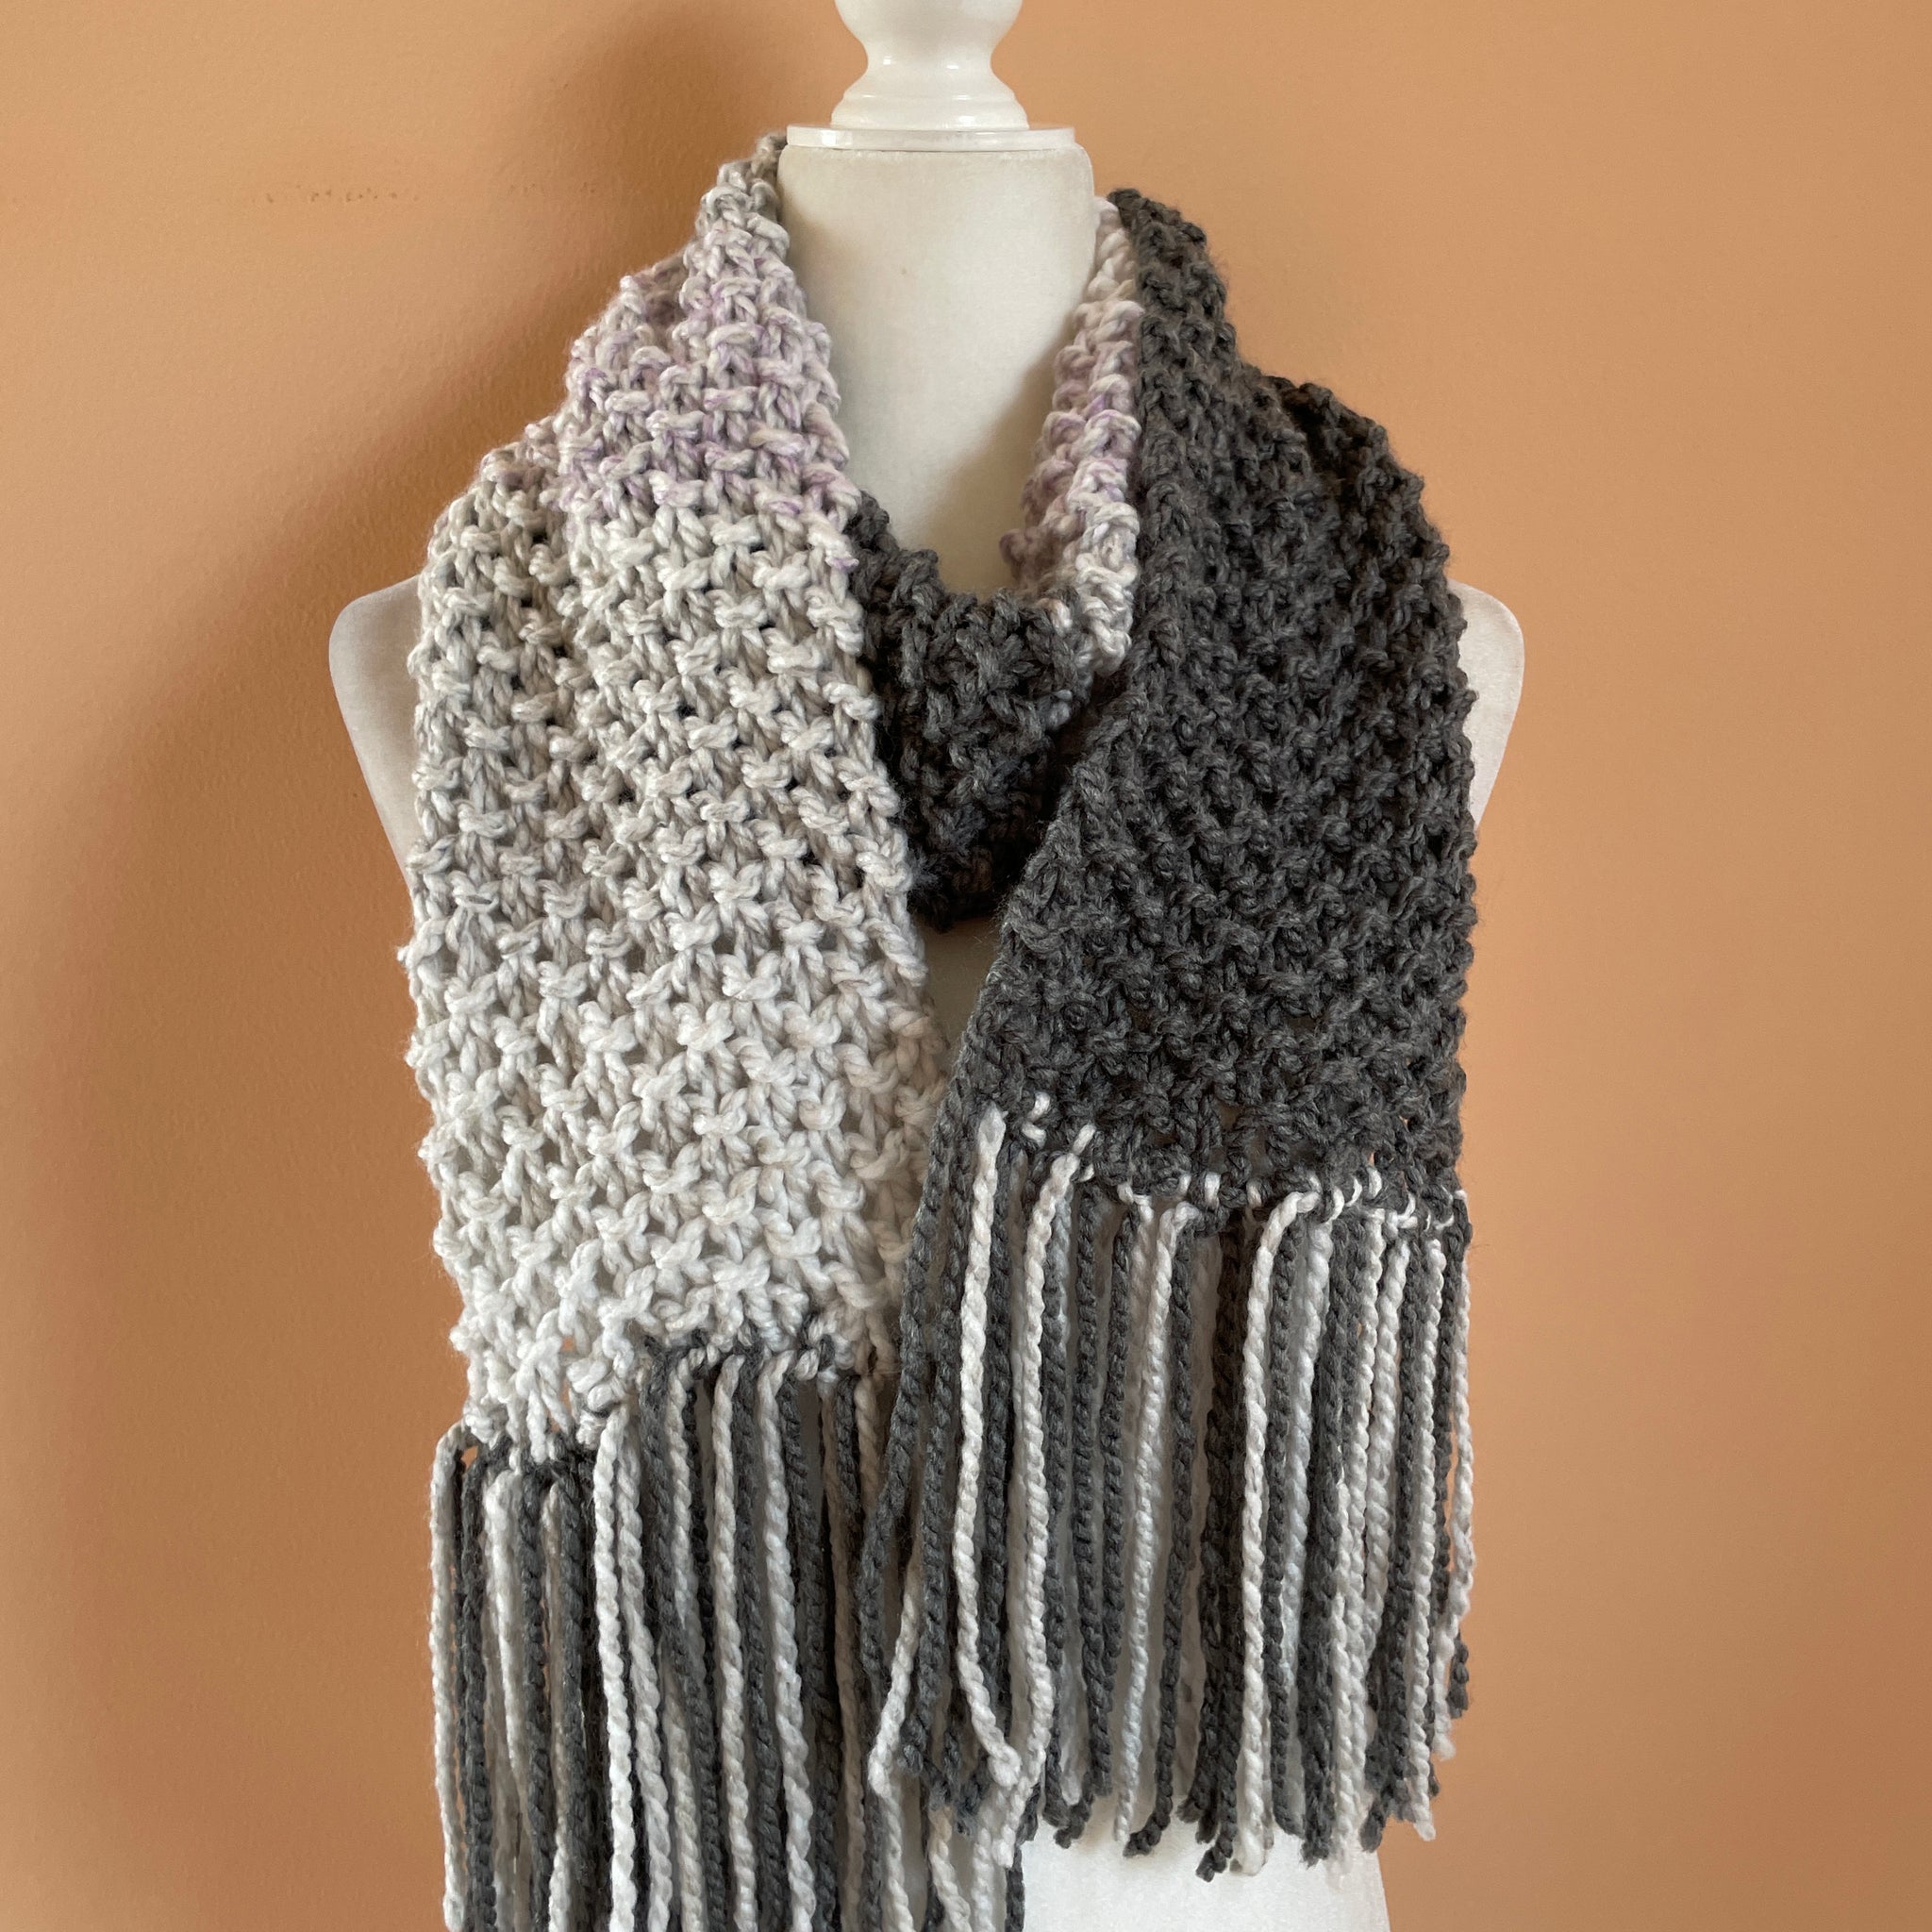 Hand knit winter scarf